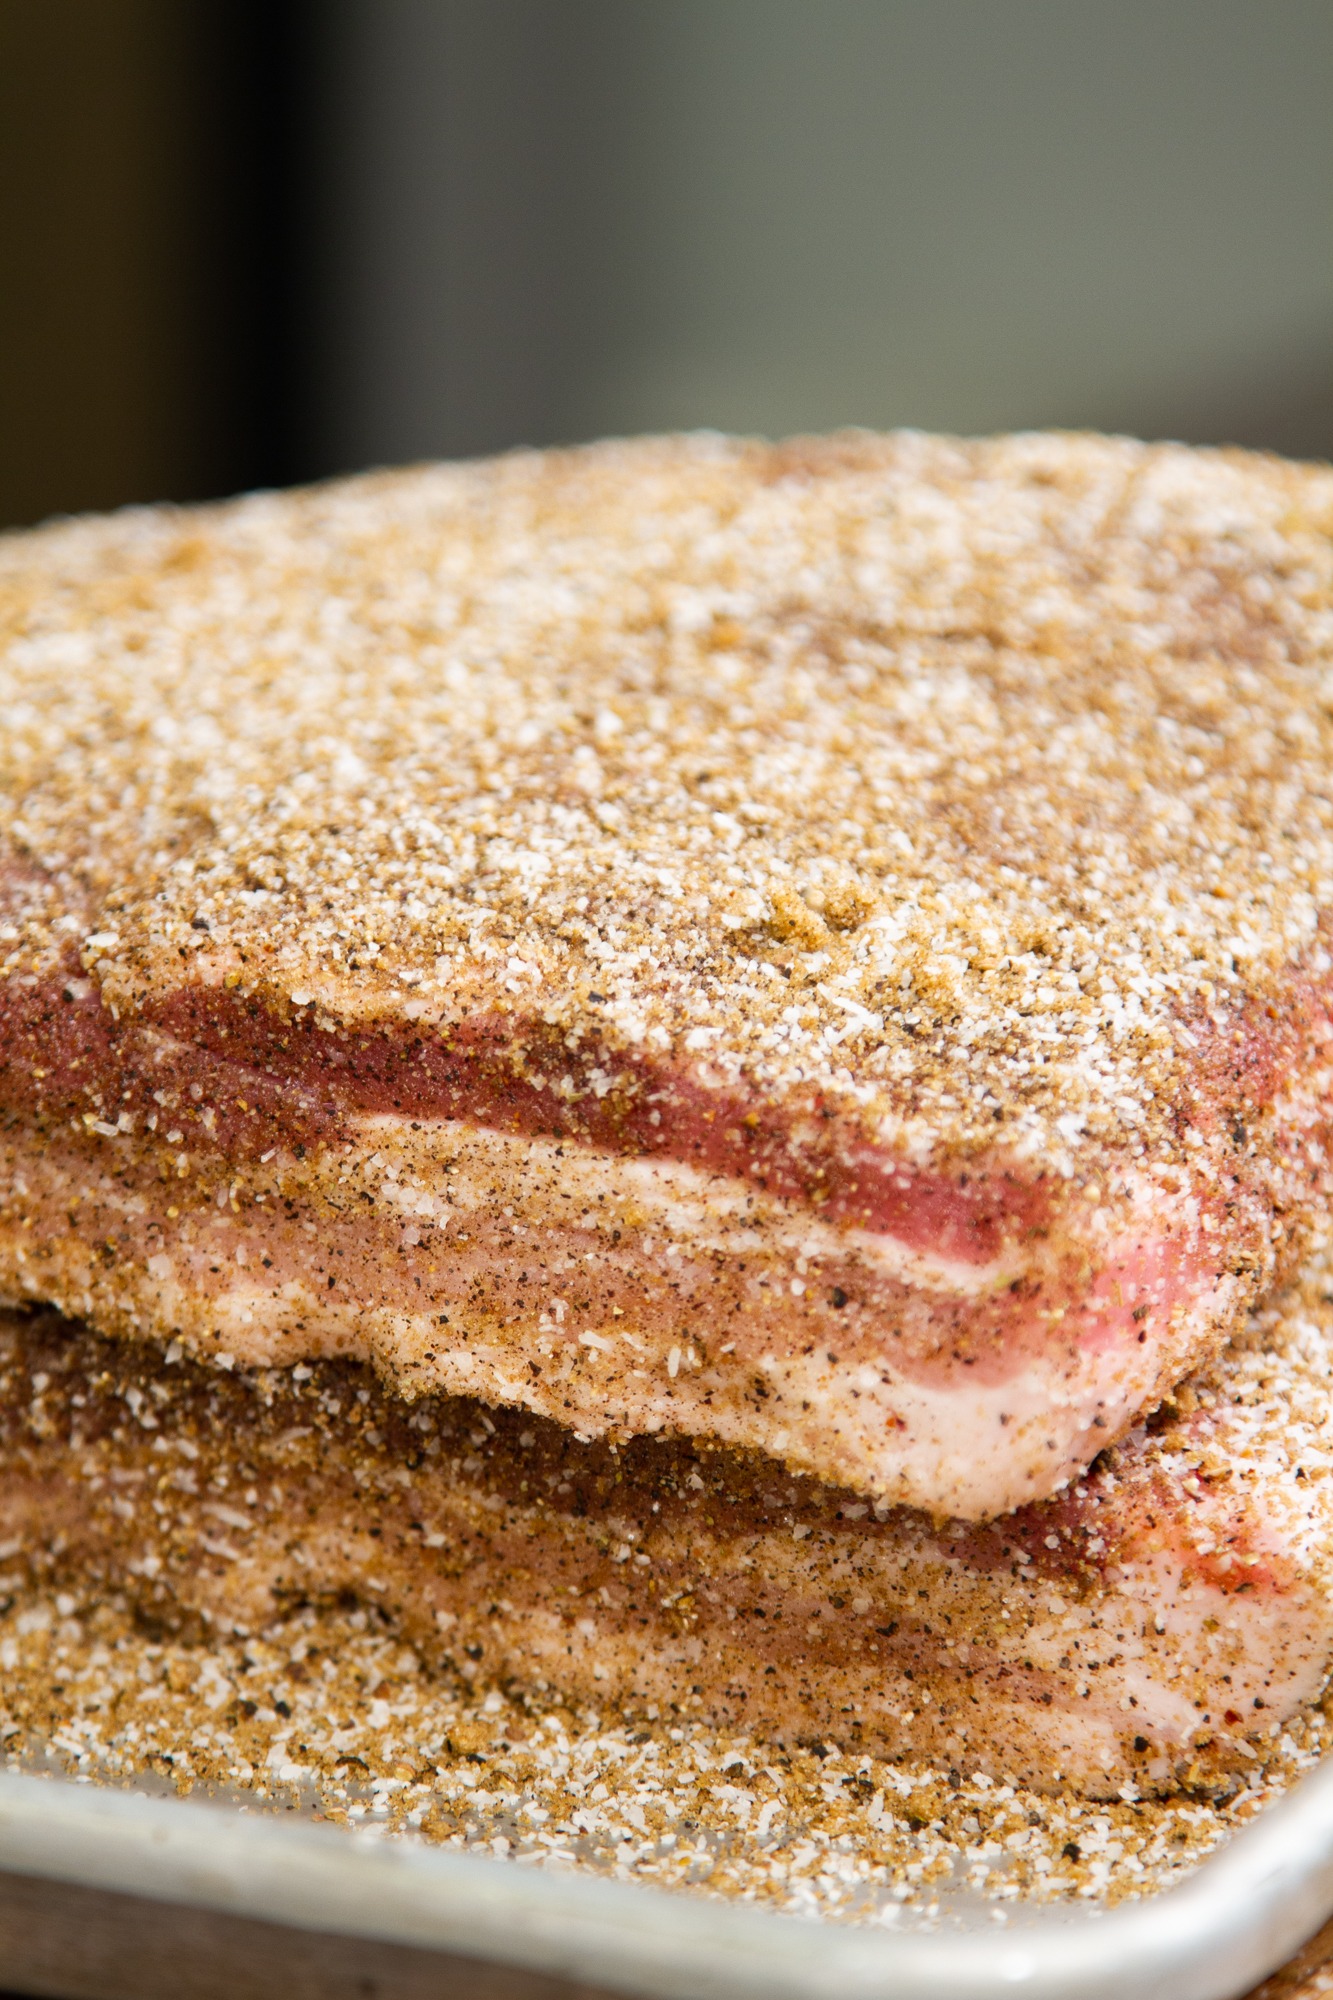 How to Make Your Own Smoked Bacon